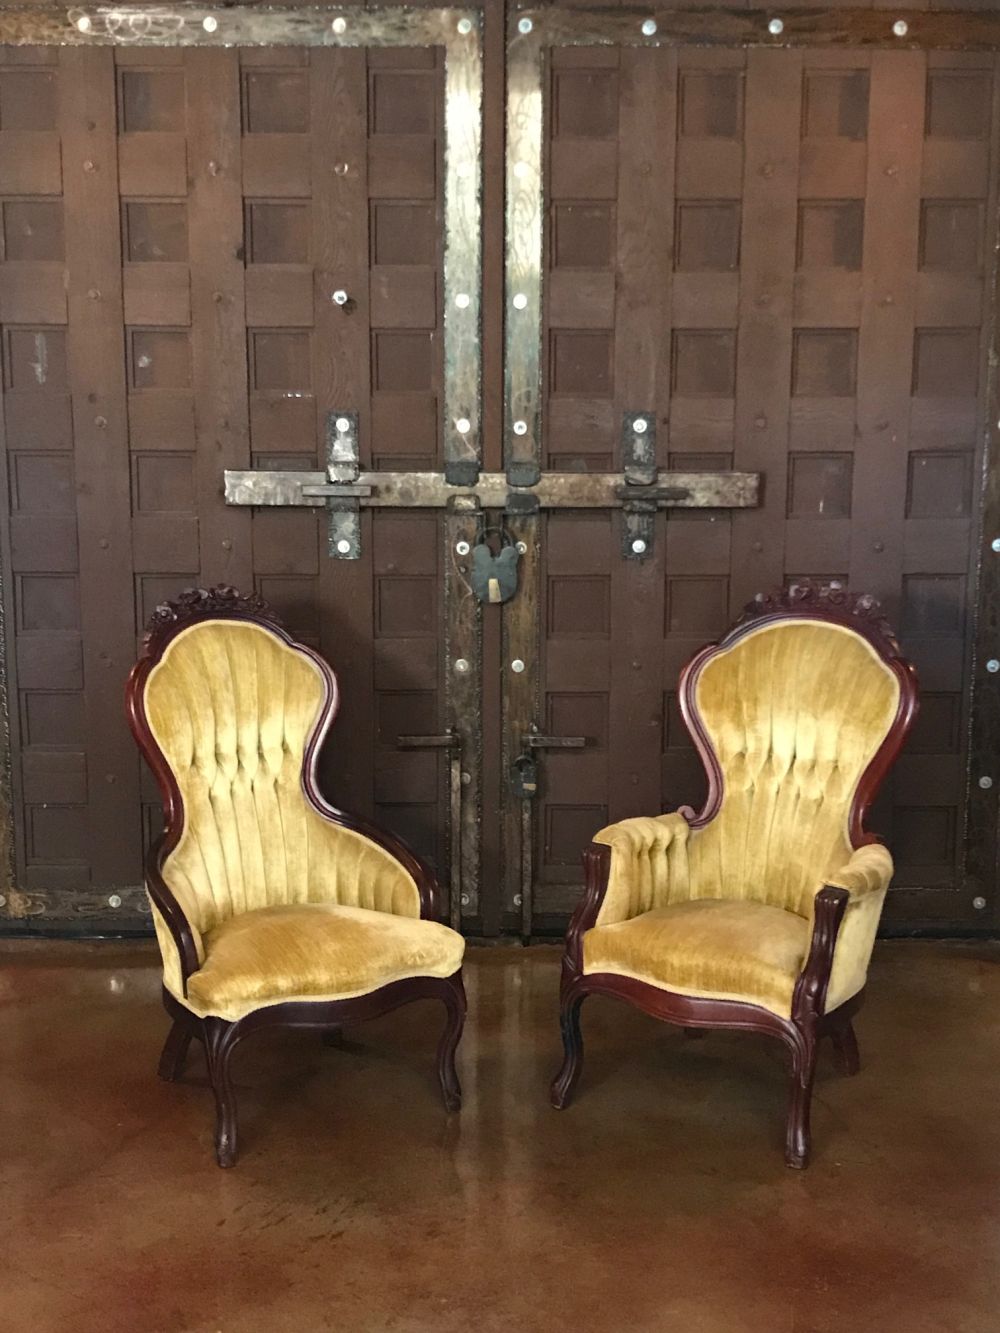 King & Queen Chairs